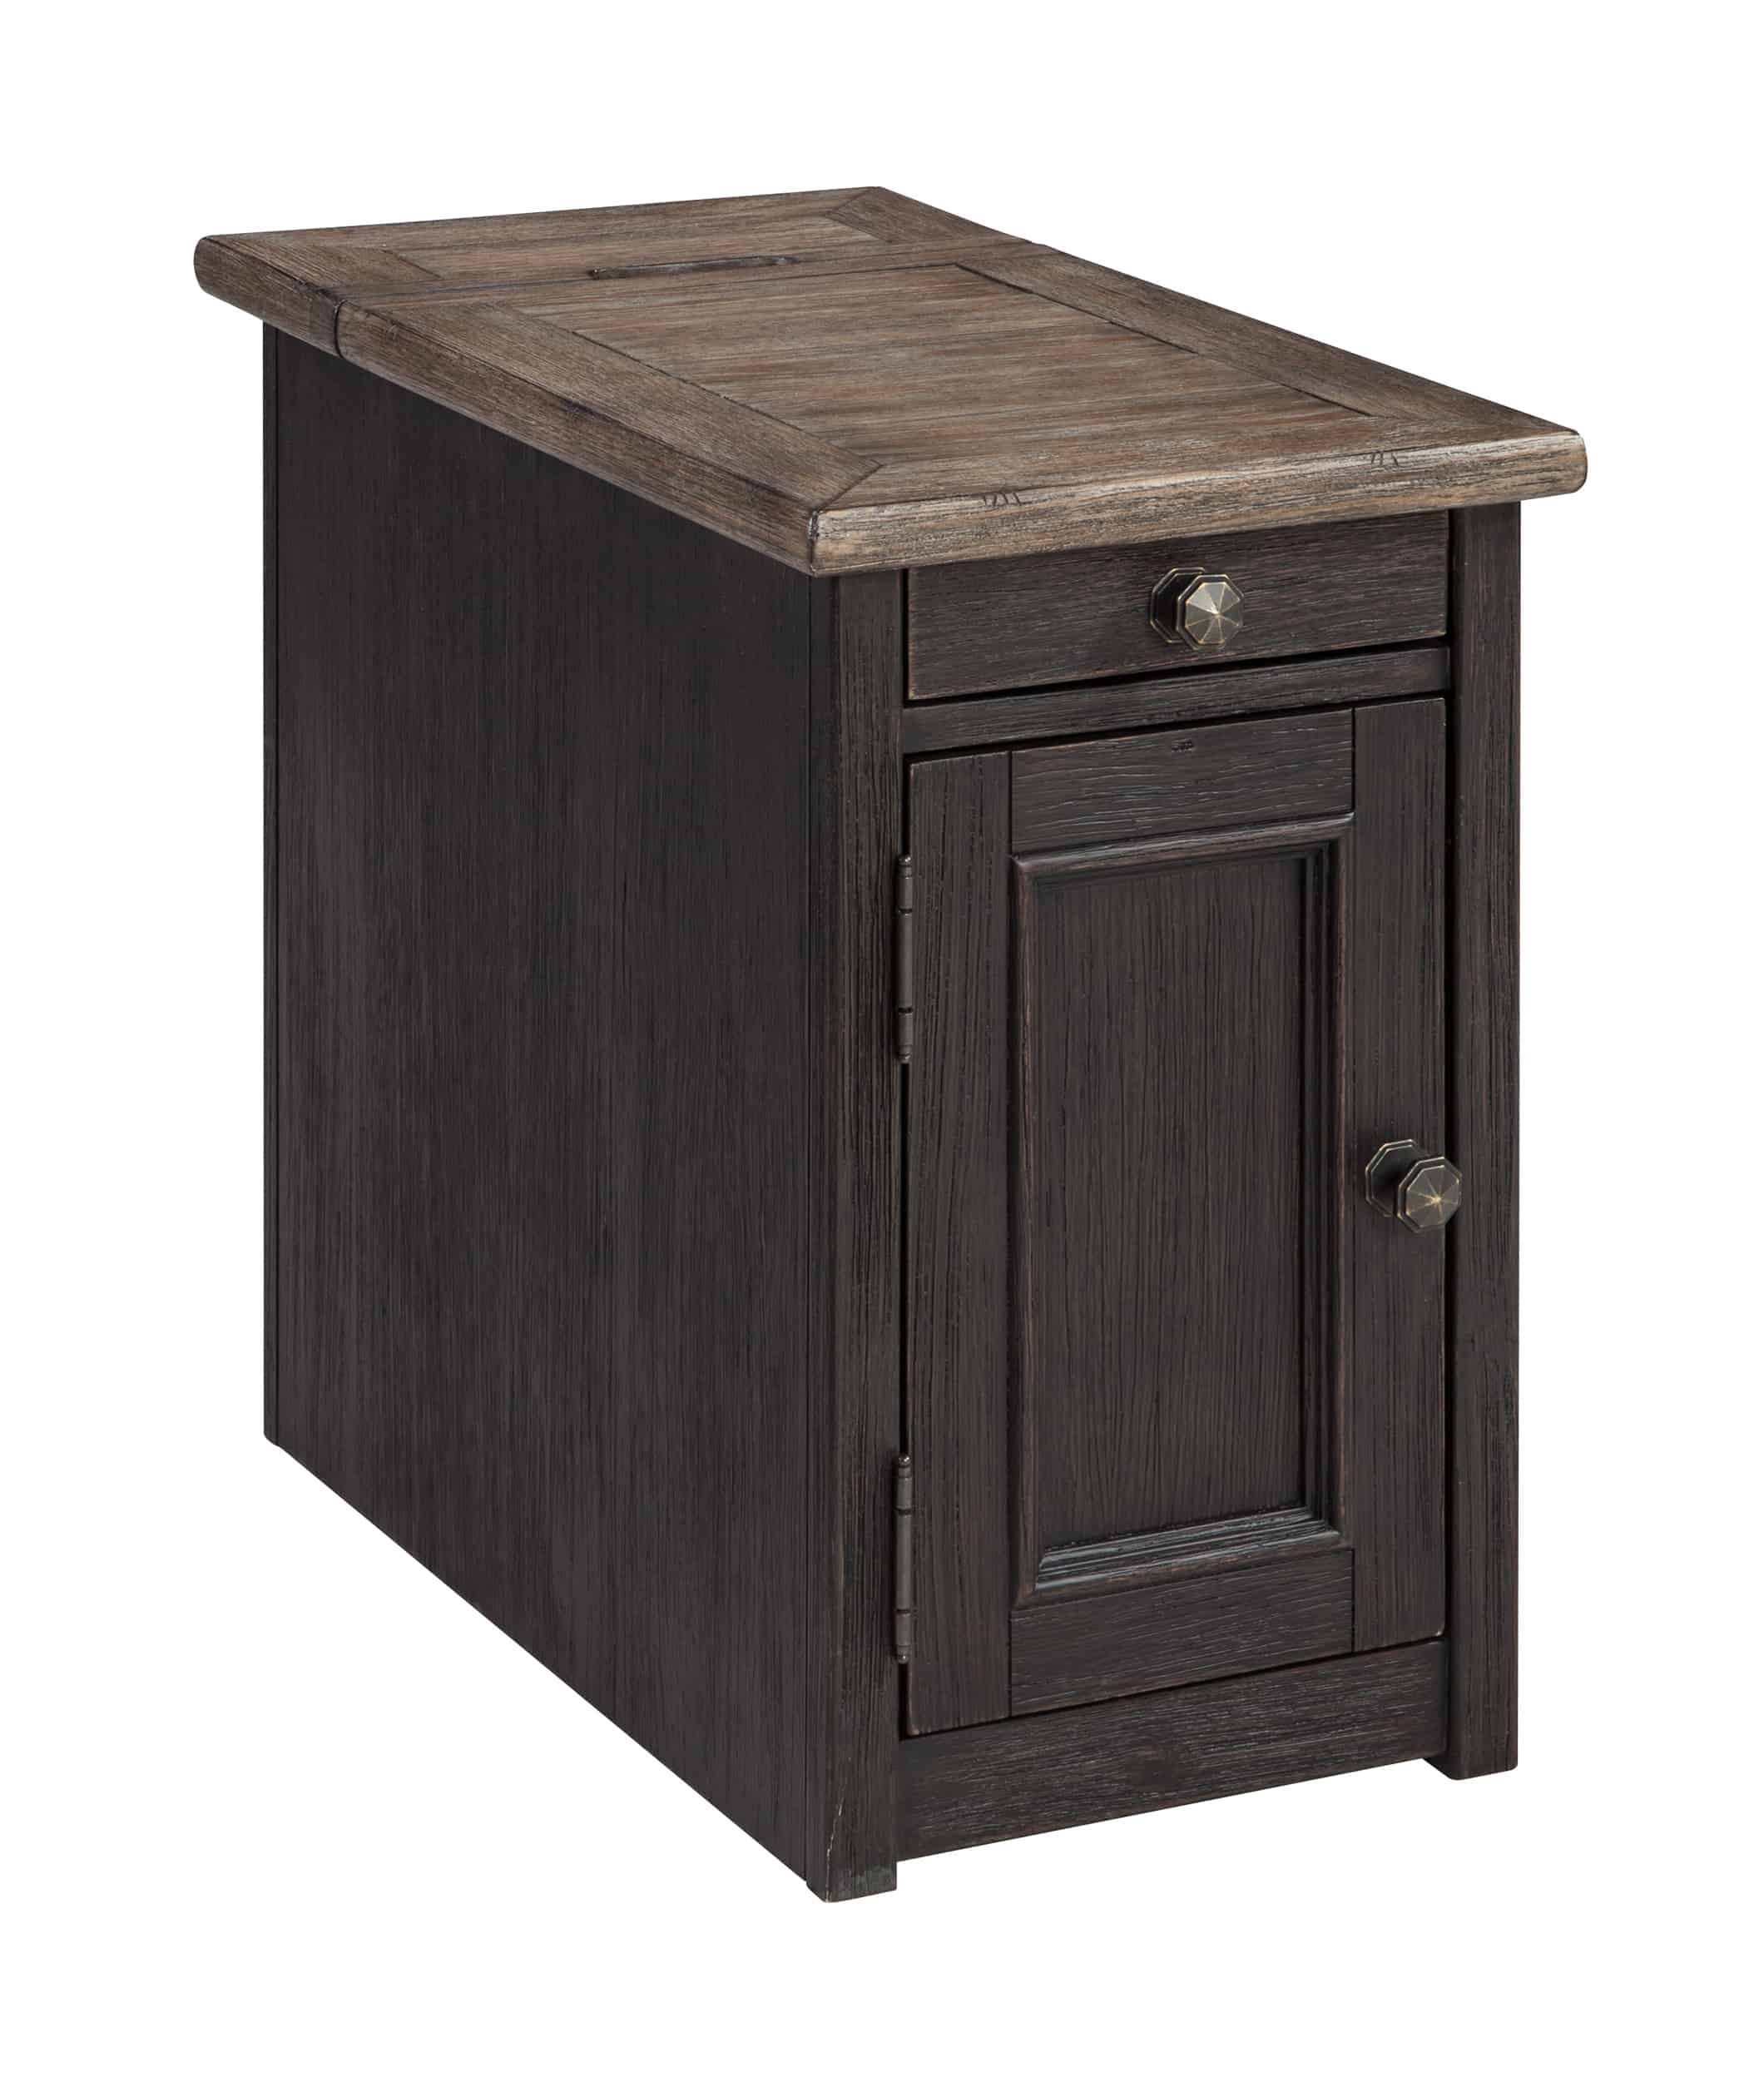 Tyler Creek Chairside End Table T736-7